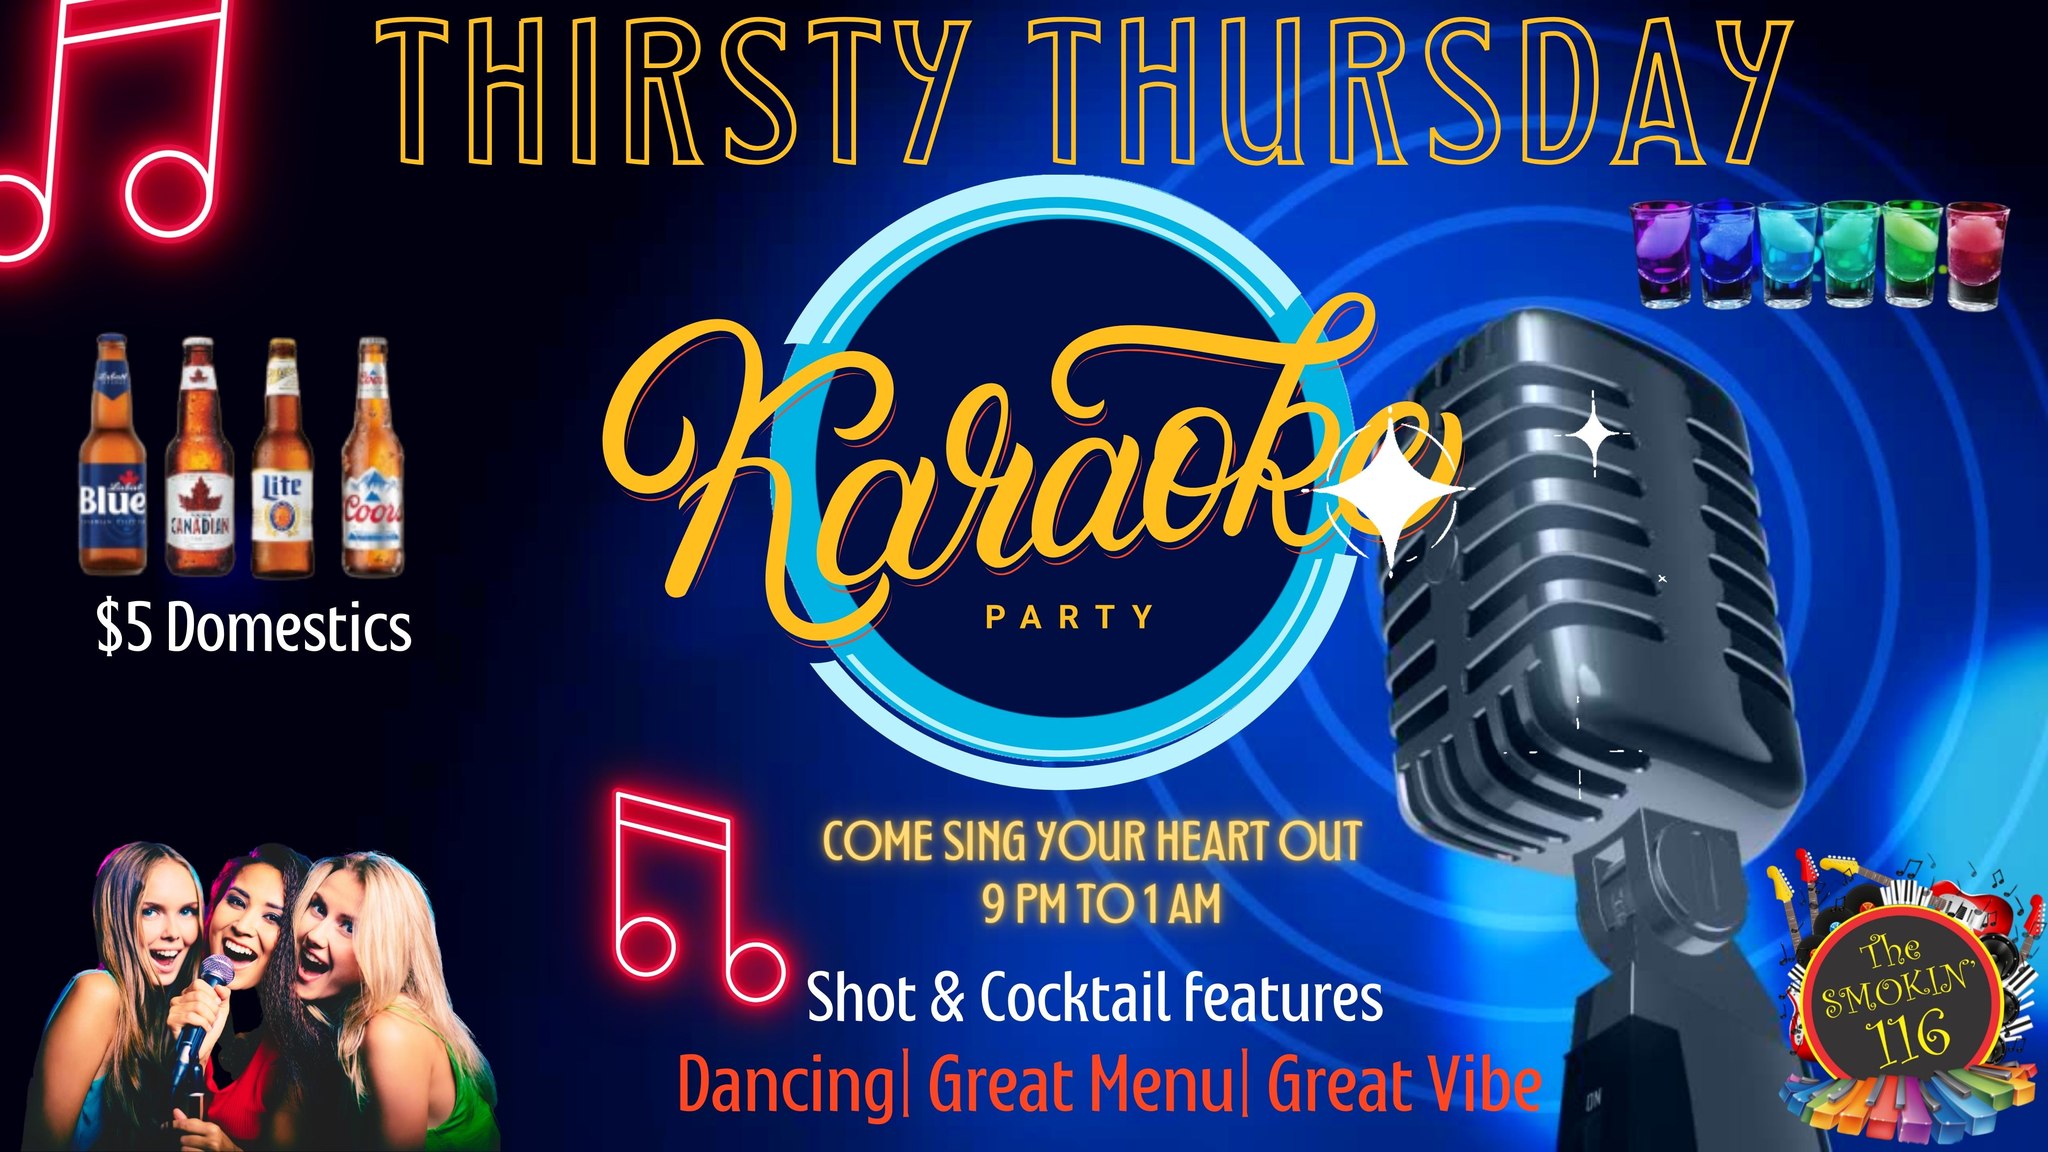 Poster with microphone and group of young people on it. Reads "Thirsty Thursday Karaoke Night"